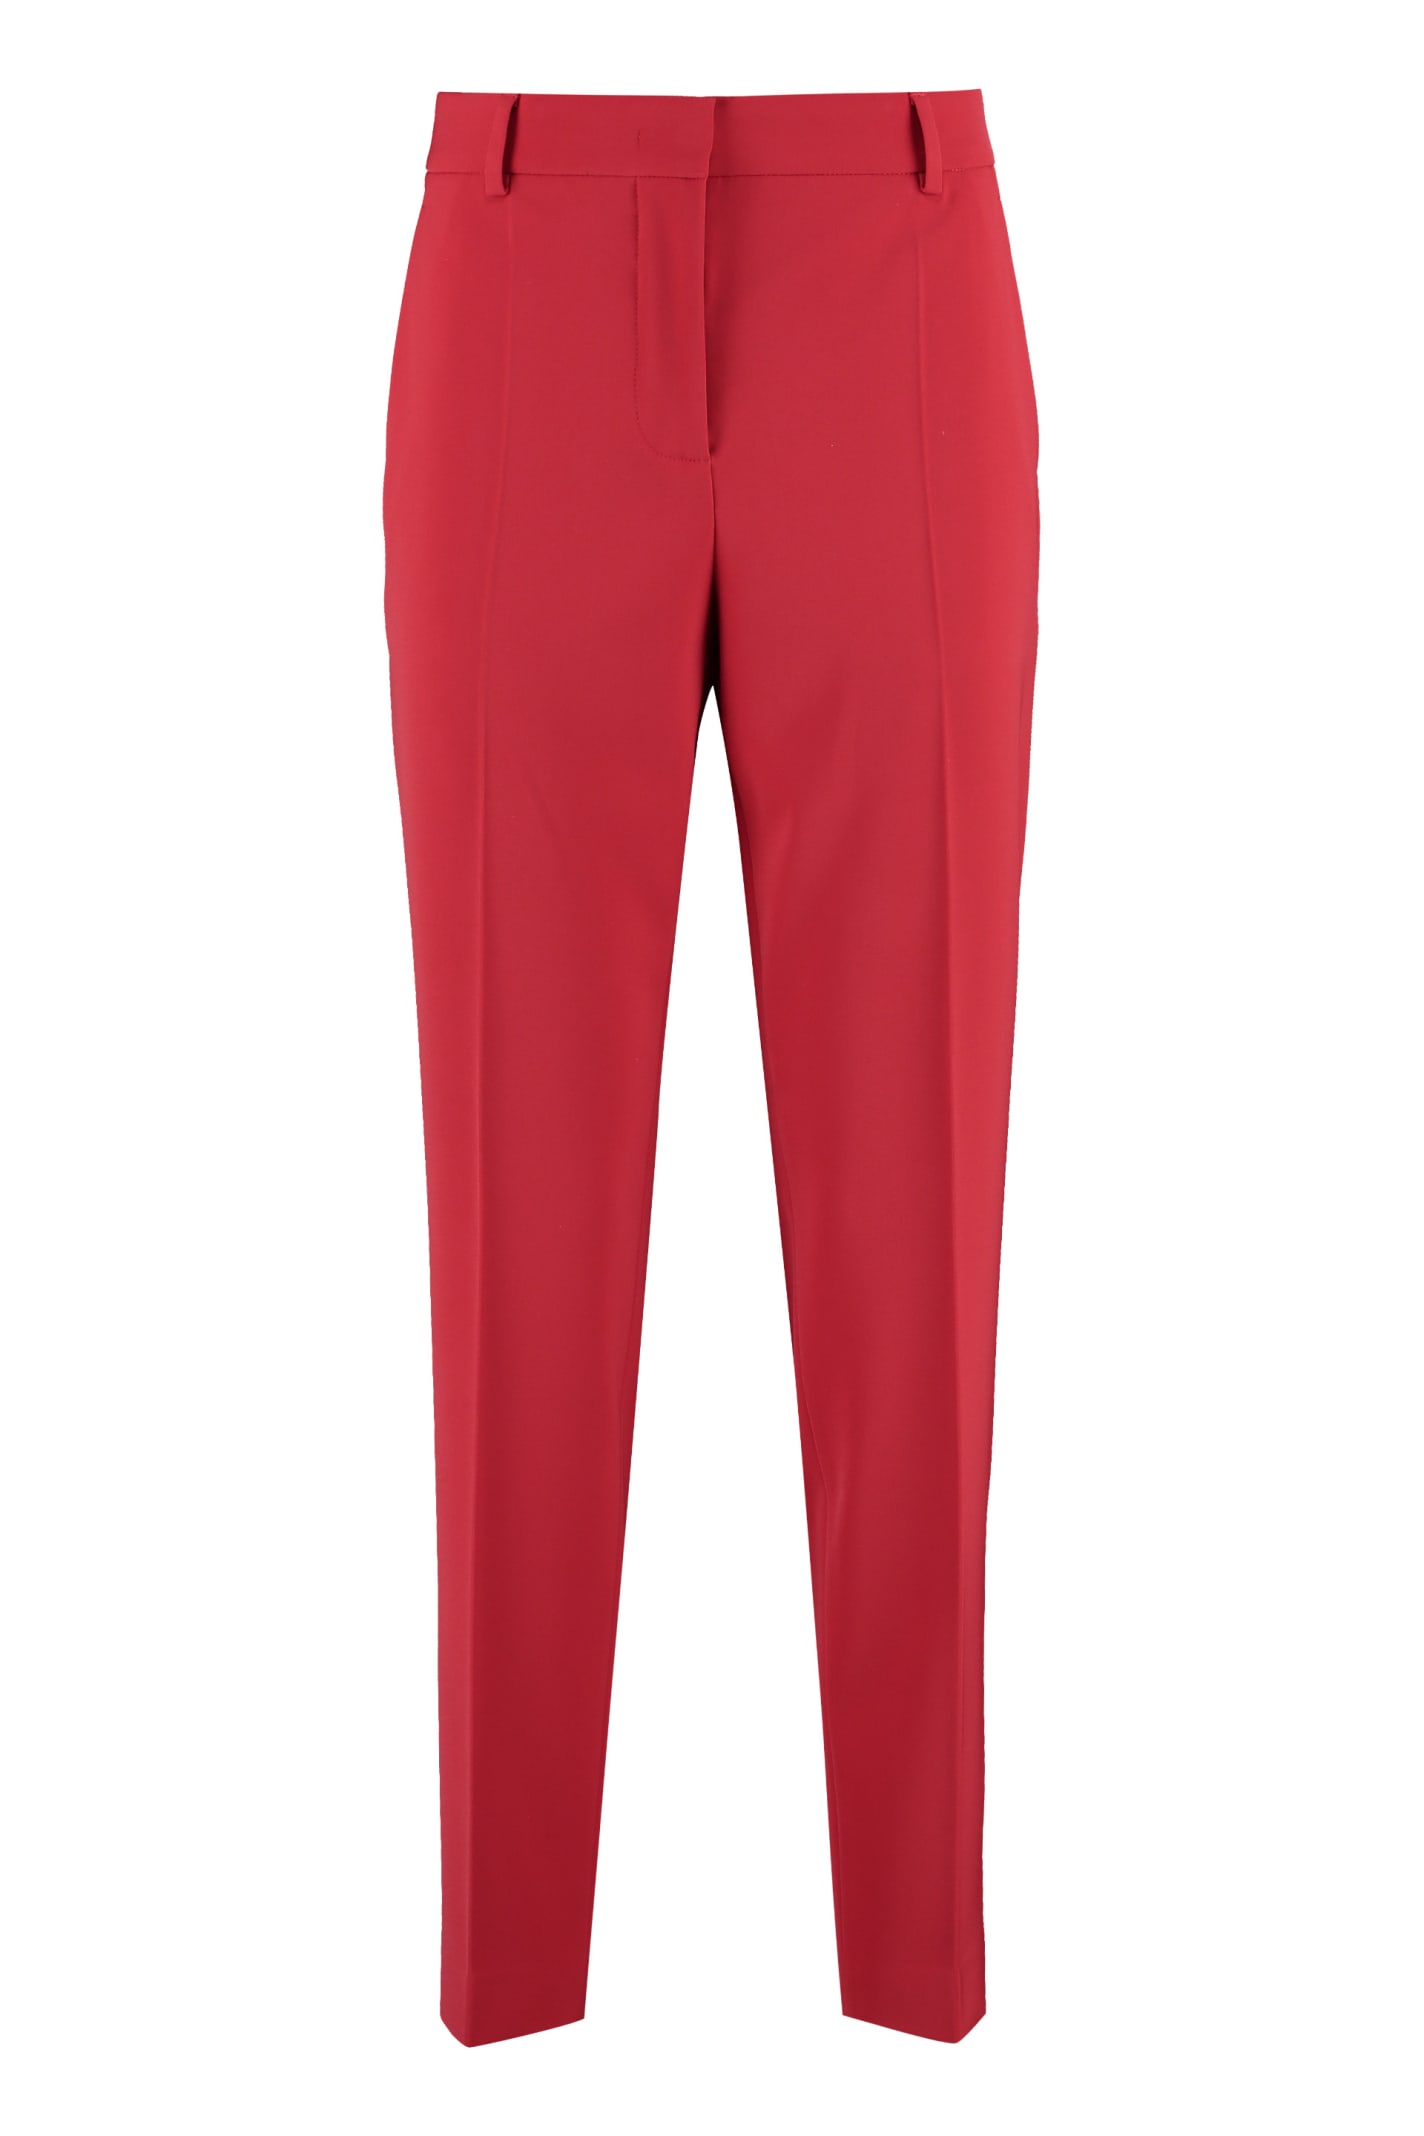 Boutique Moschino Crepe Pants With Straight Legs